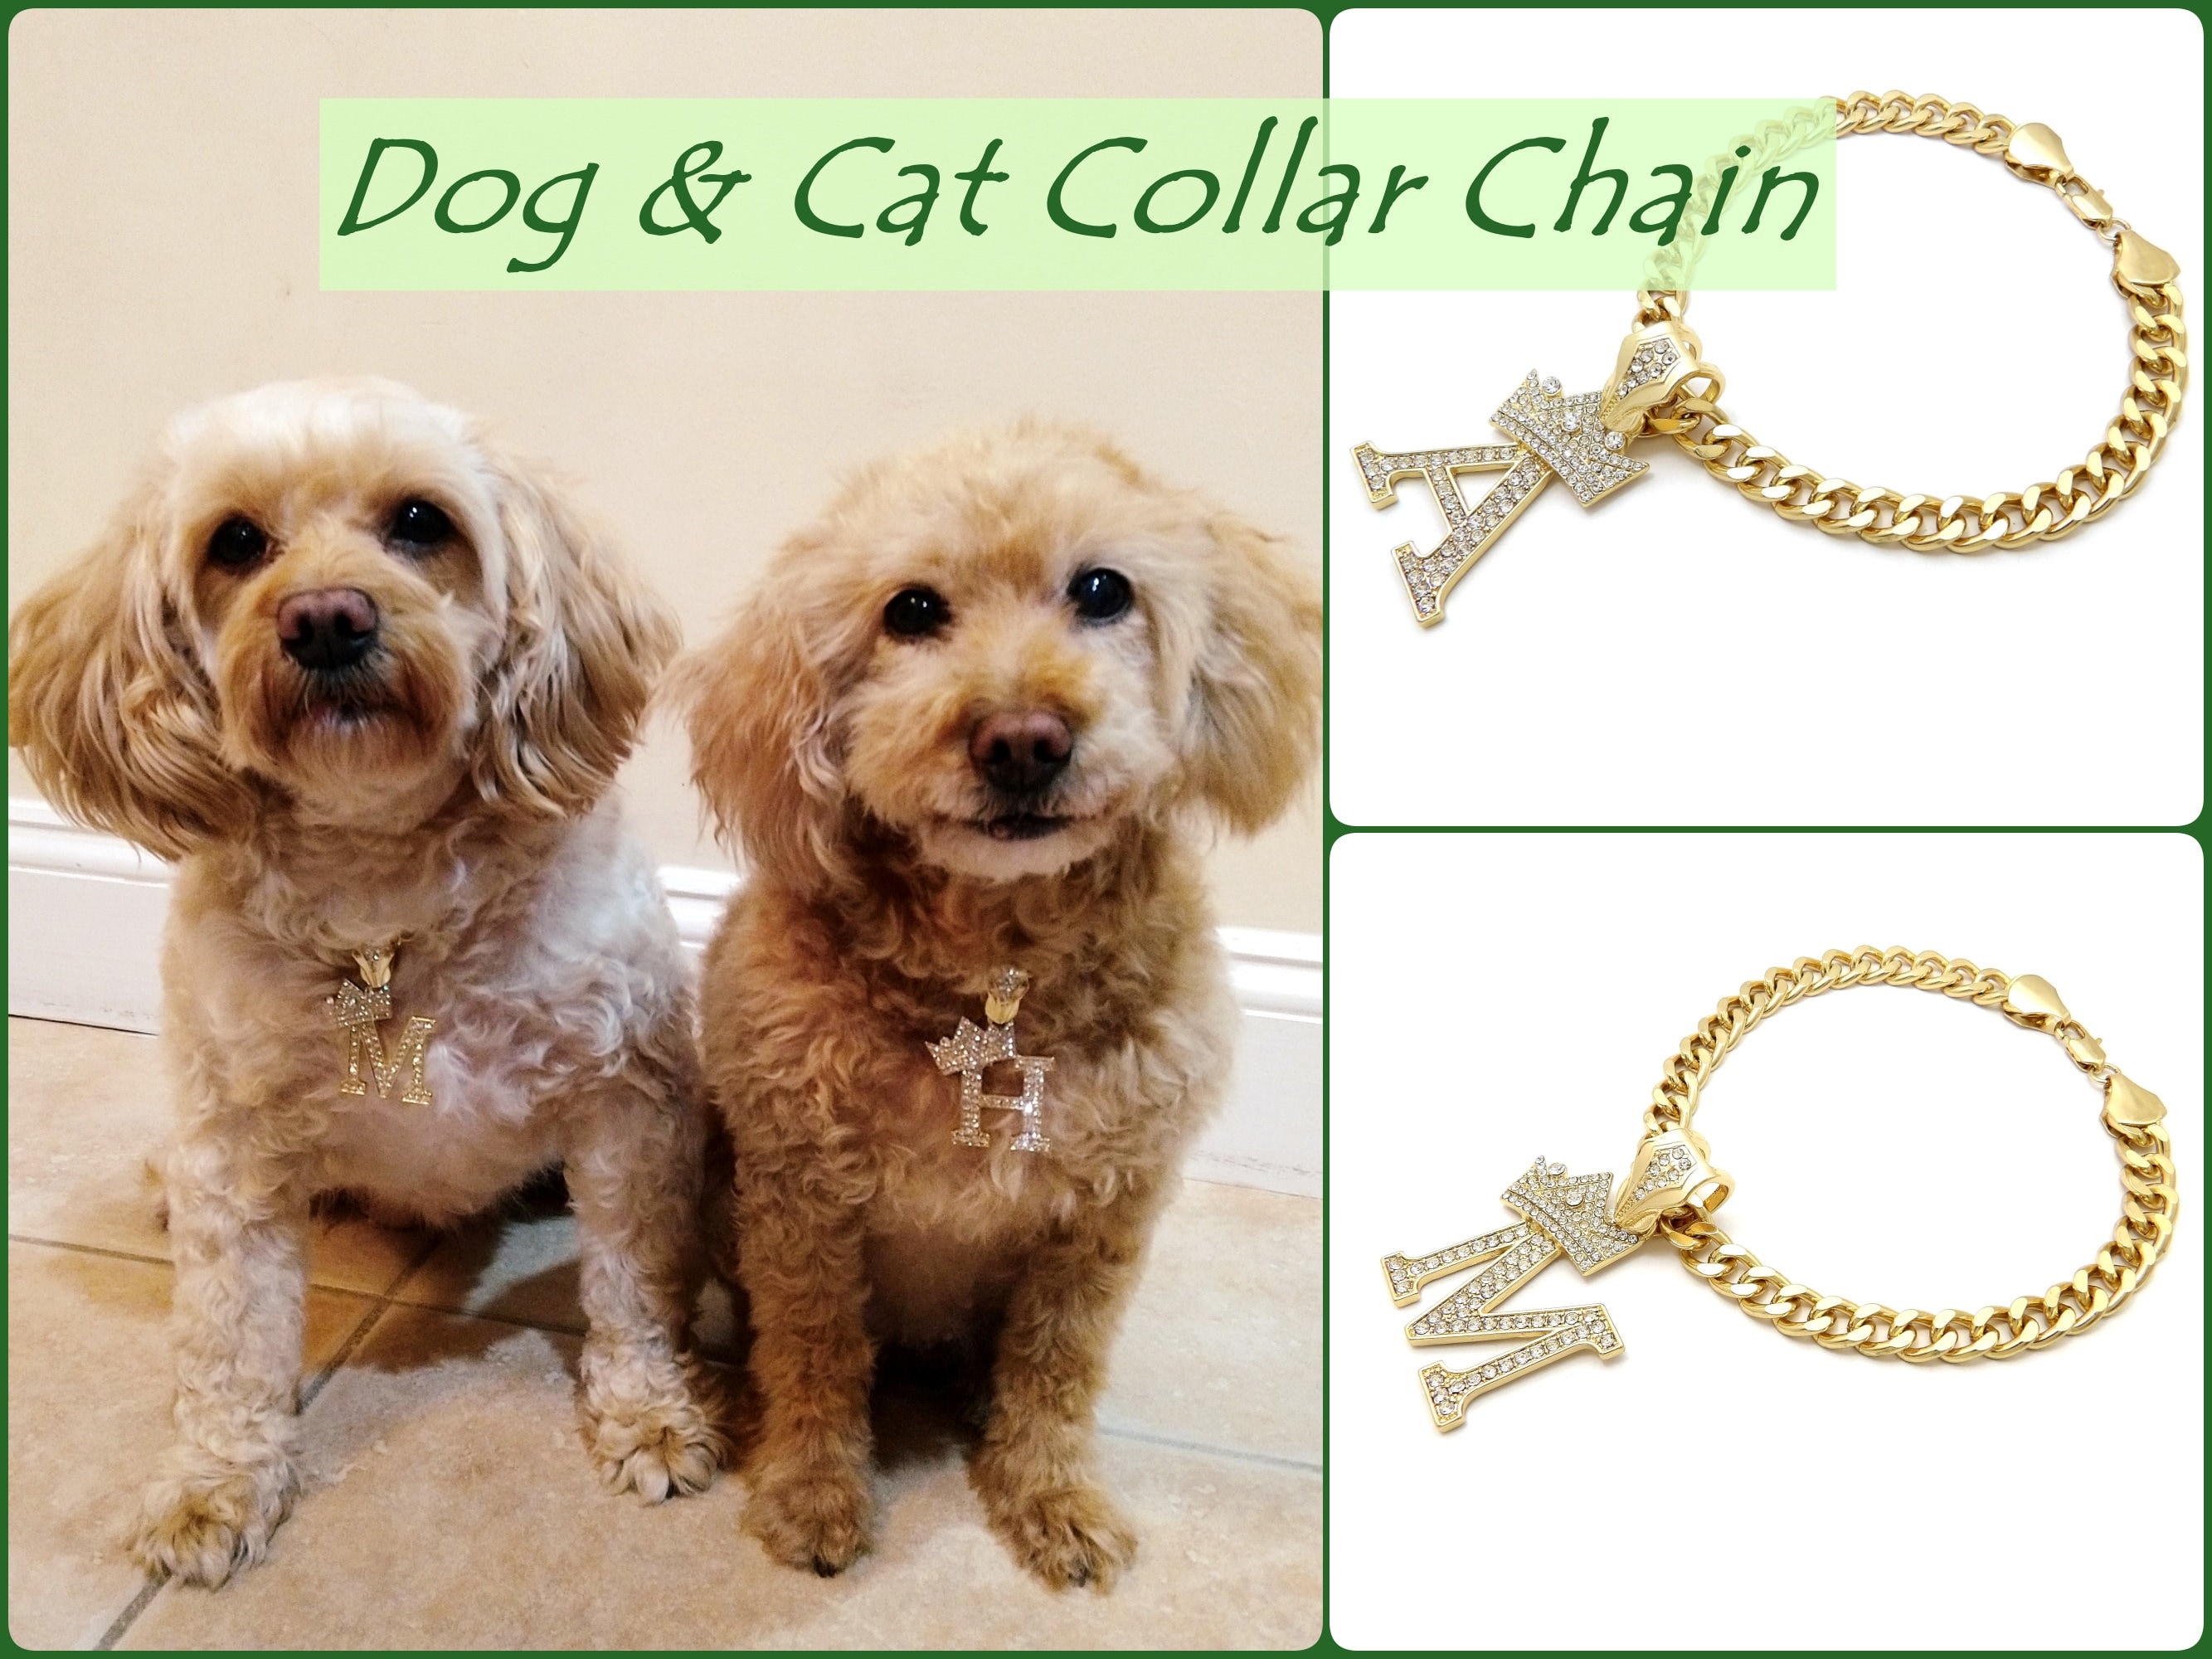 Gold Chain Dog Collar - 7/8 inch Wide Metal Cuban Link Dog Necklace with  Leather Belt, Lightweight Protect Puppy's Neck, Cute Fashion Dog Jewelry